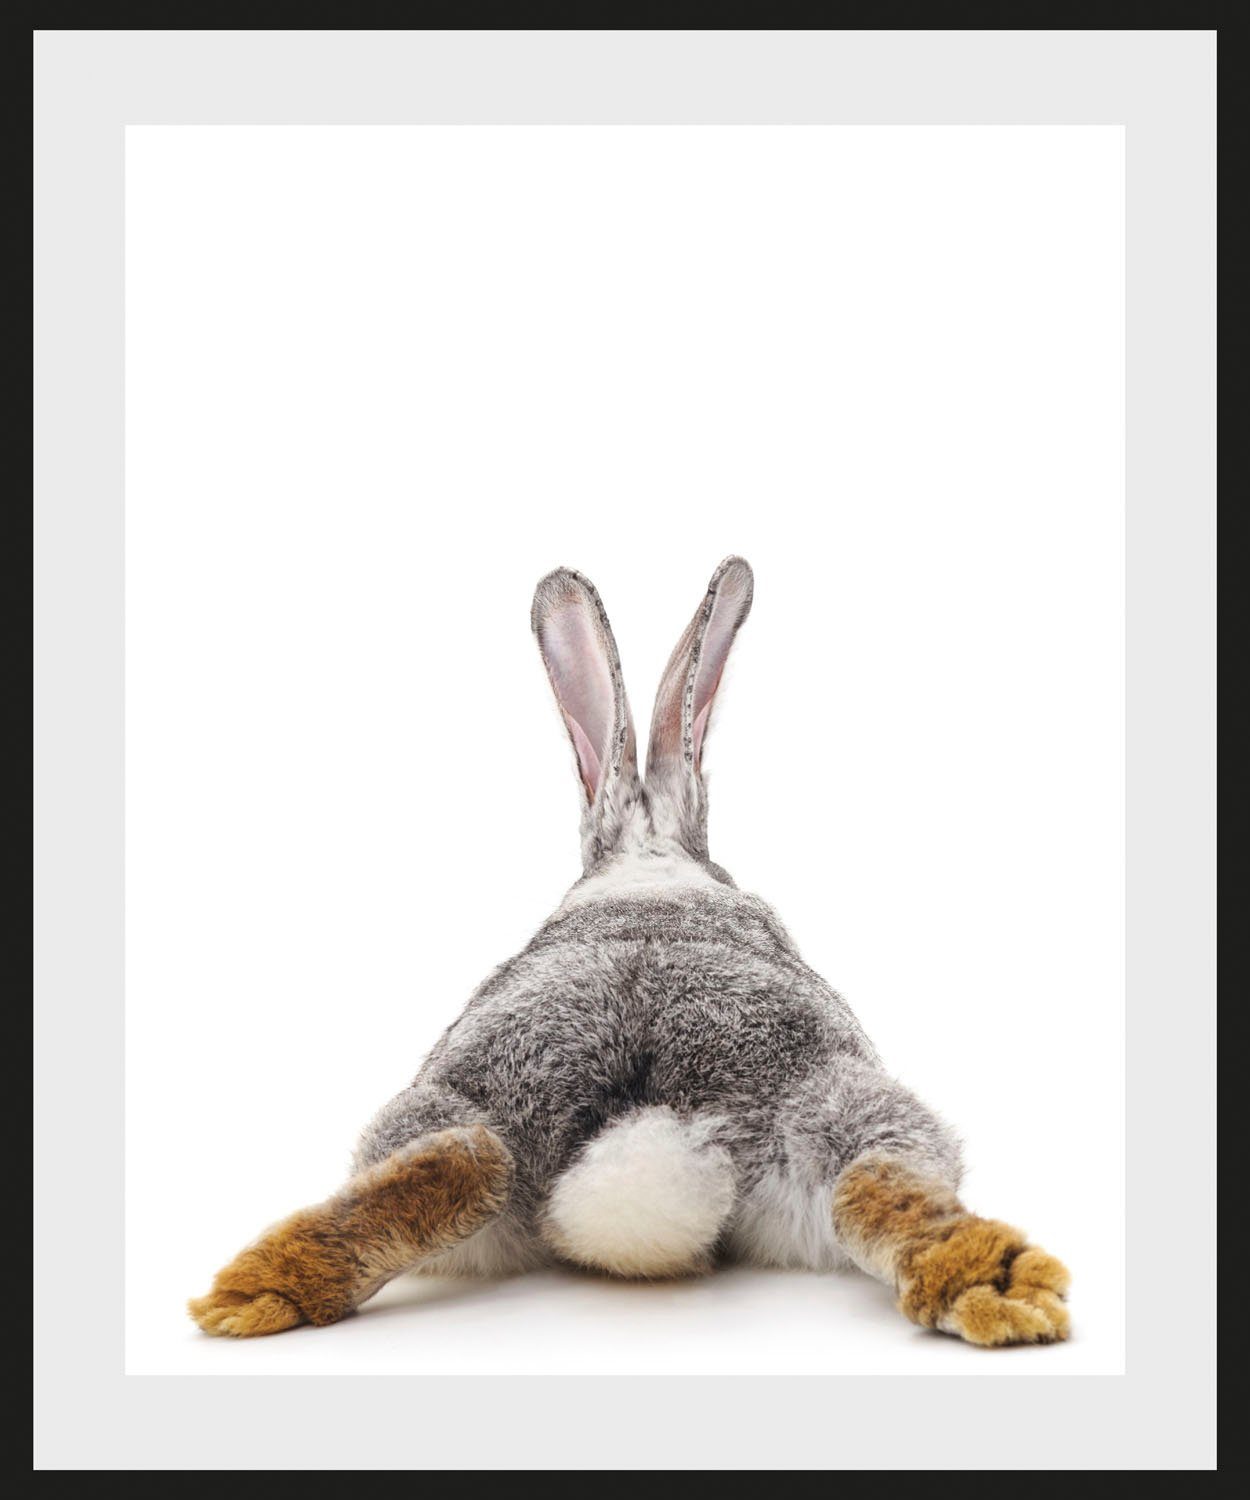 Hase (1 queence Bild St) Tail, Bunny